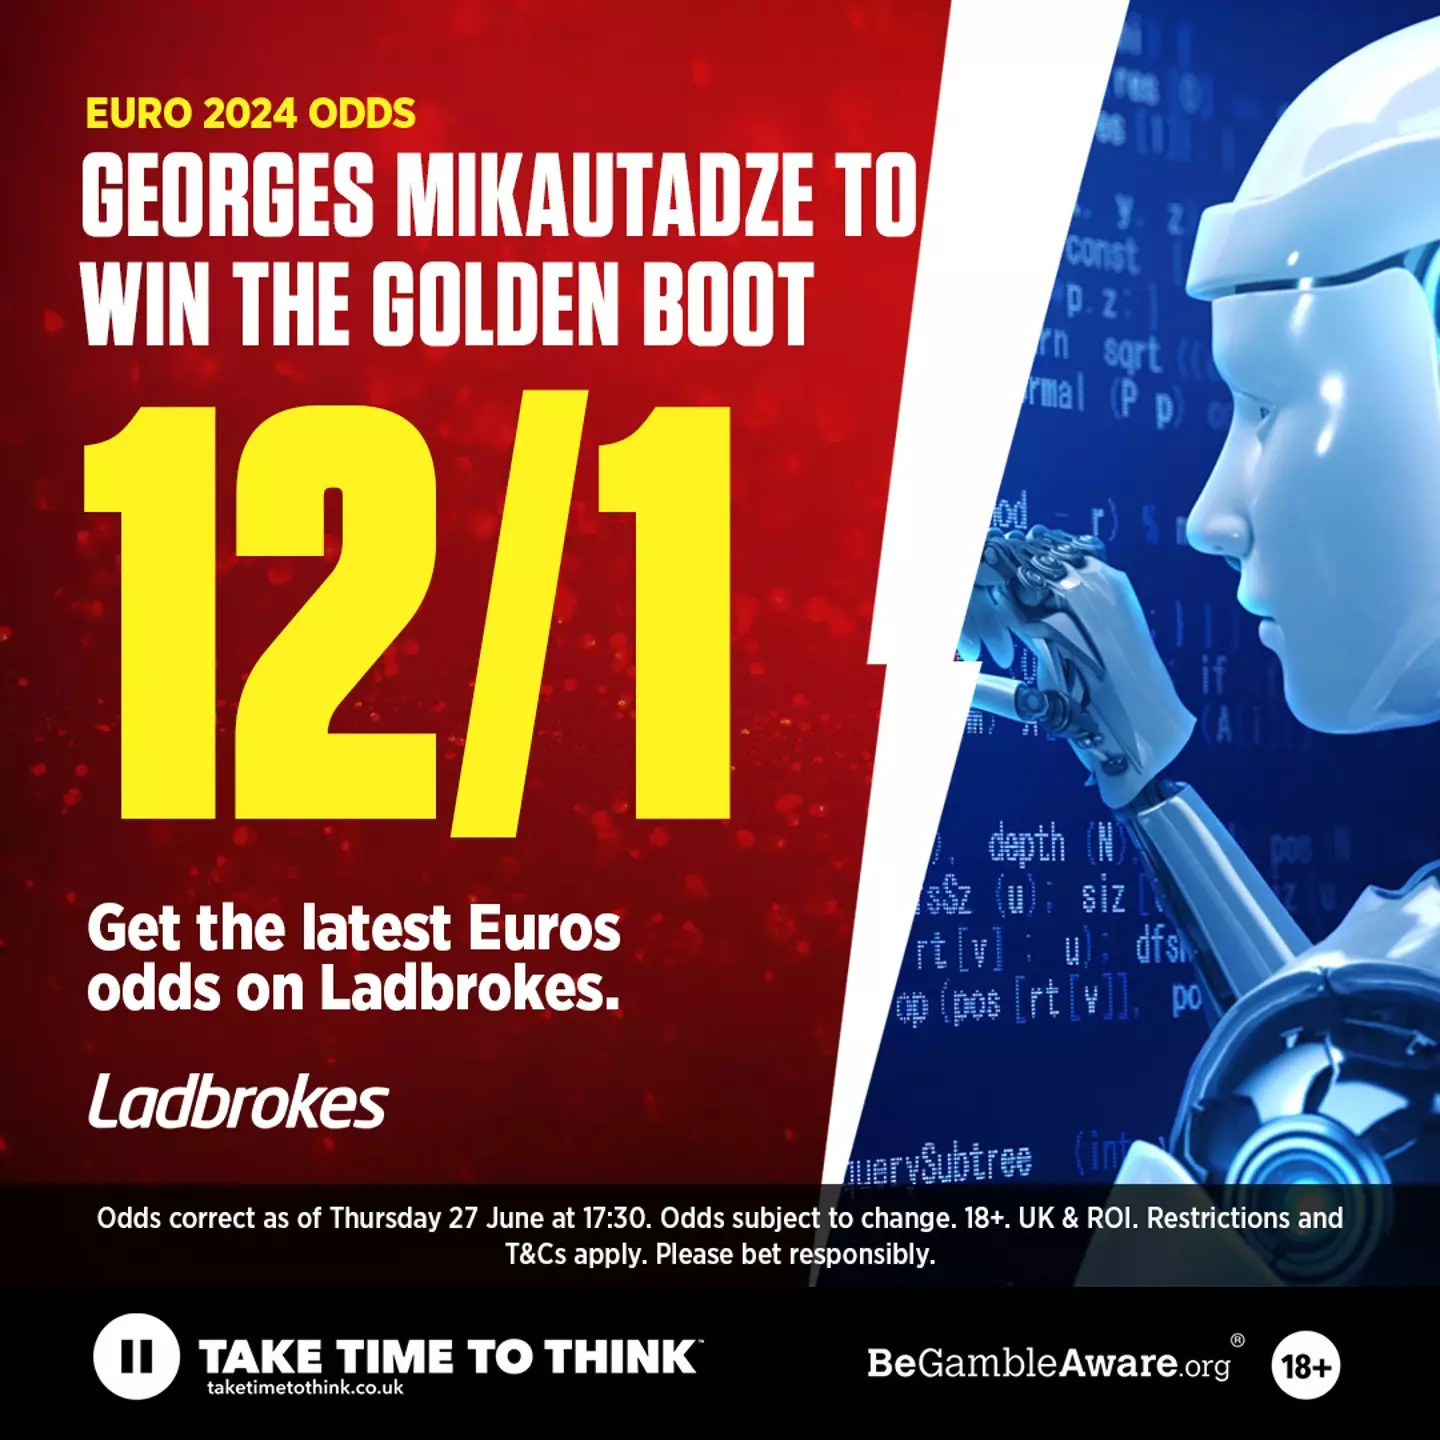 Georges Mikautadze to win the Golden Boot